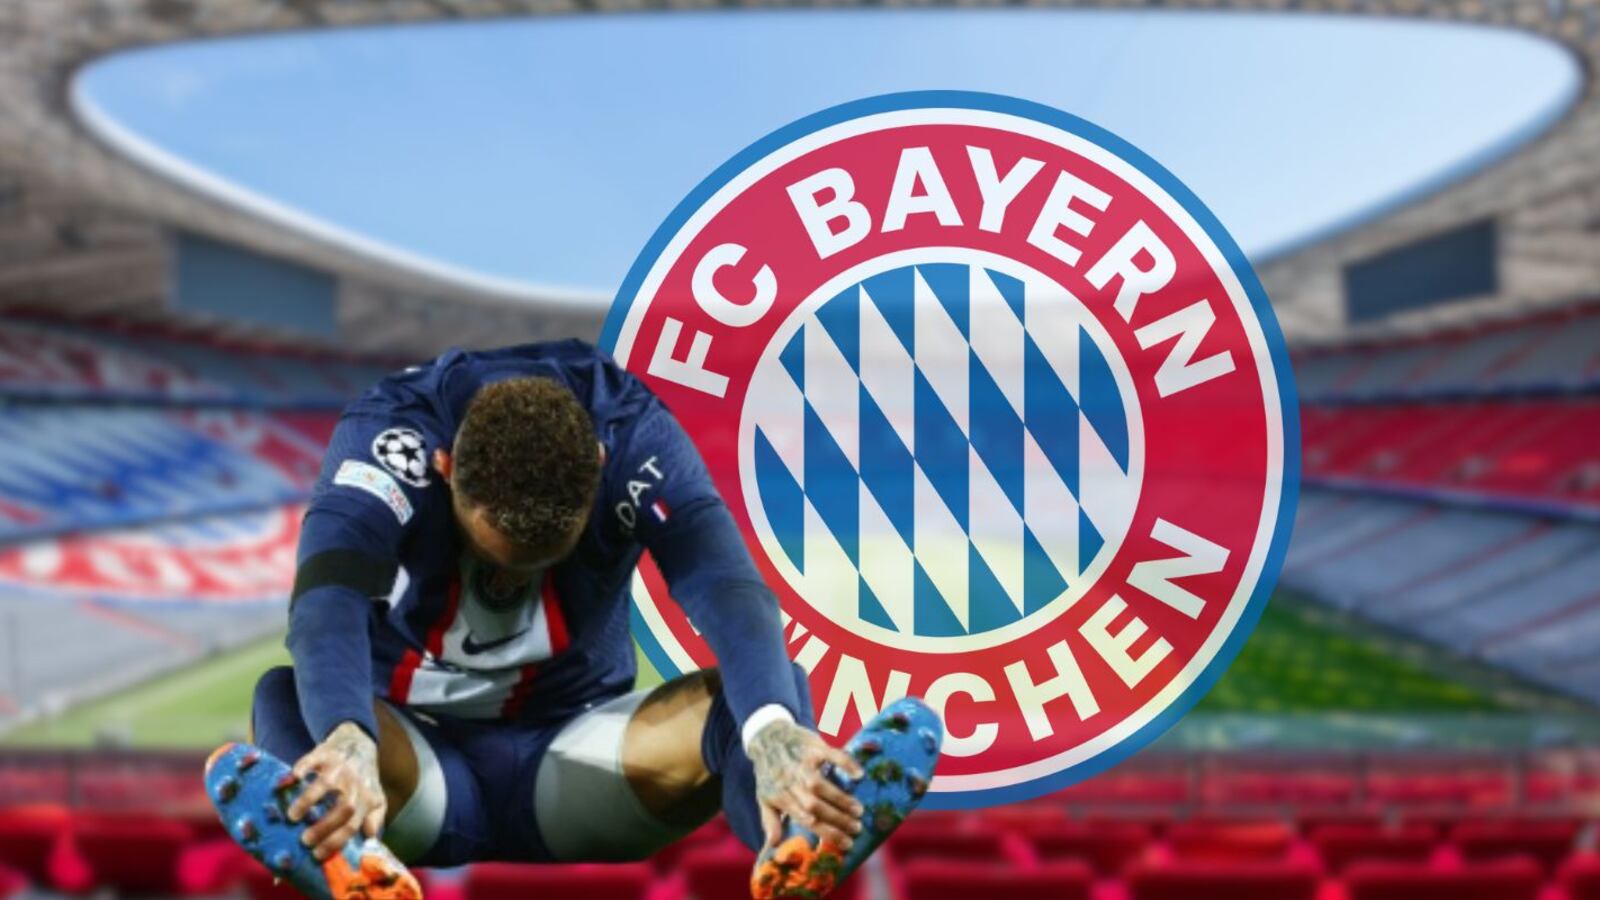 Neymar to Bayern? The reason why his arrival to the Bundesliga never materialized